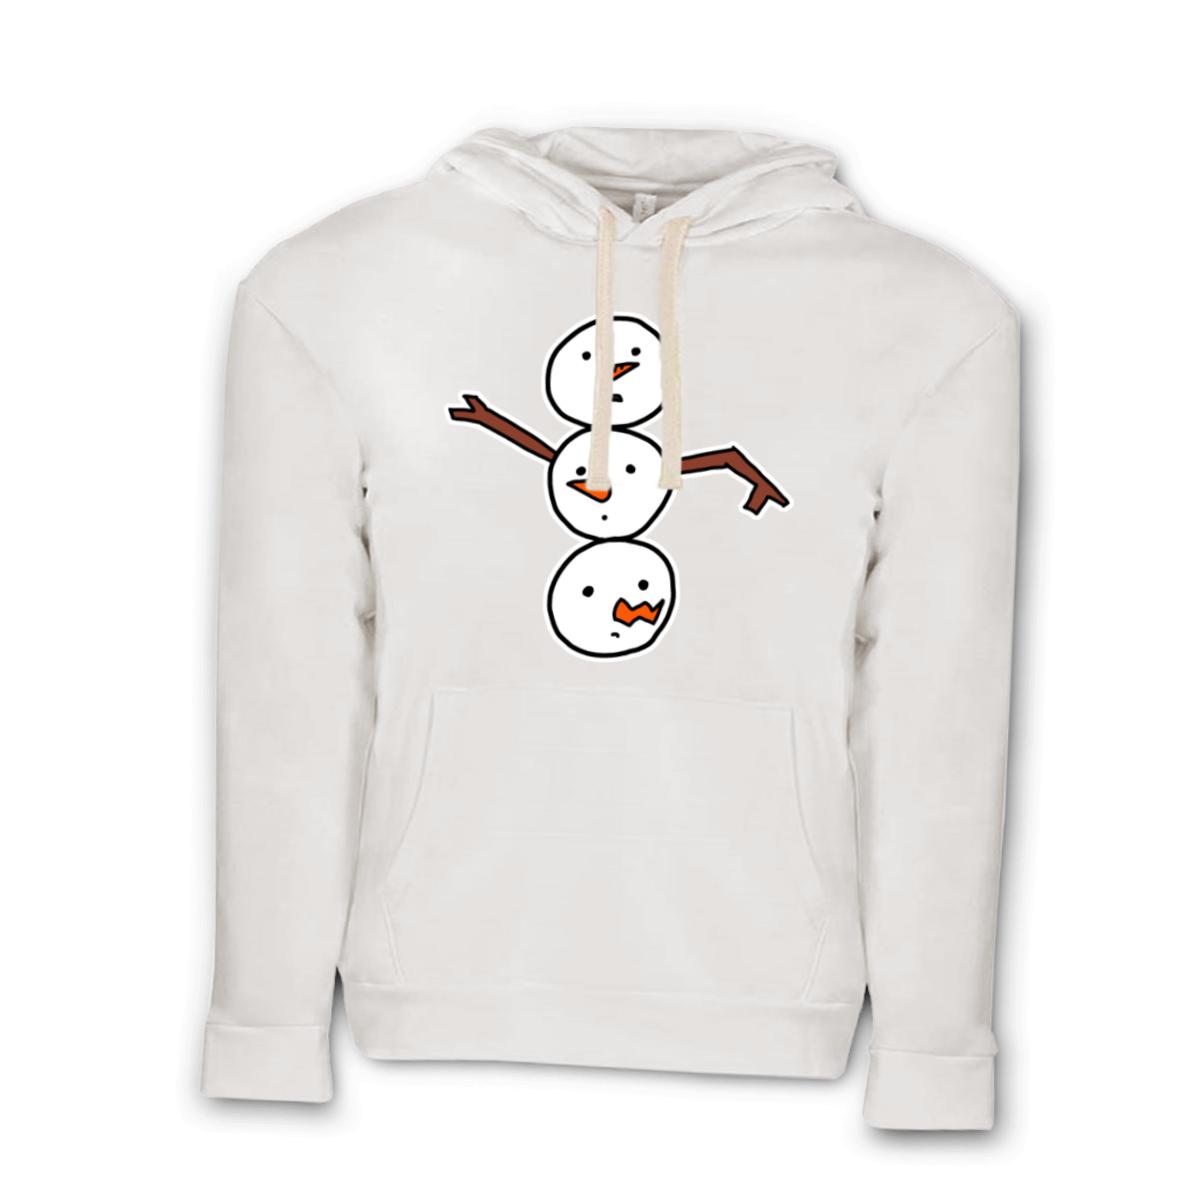 Snowman All Heads Unisex Pullover Hoodie Large white